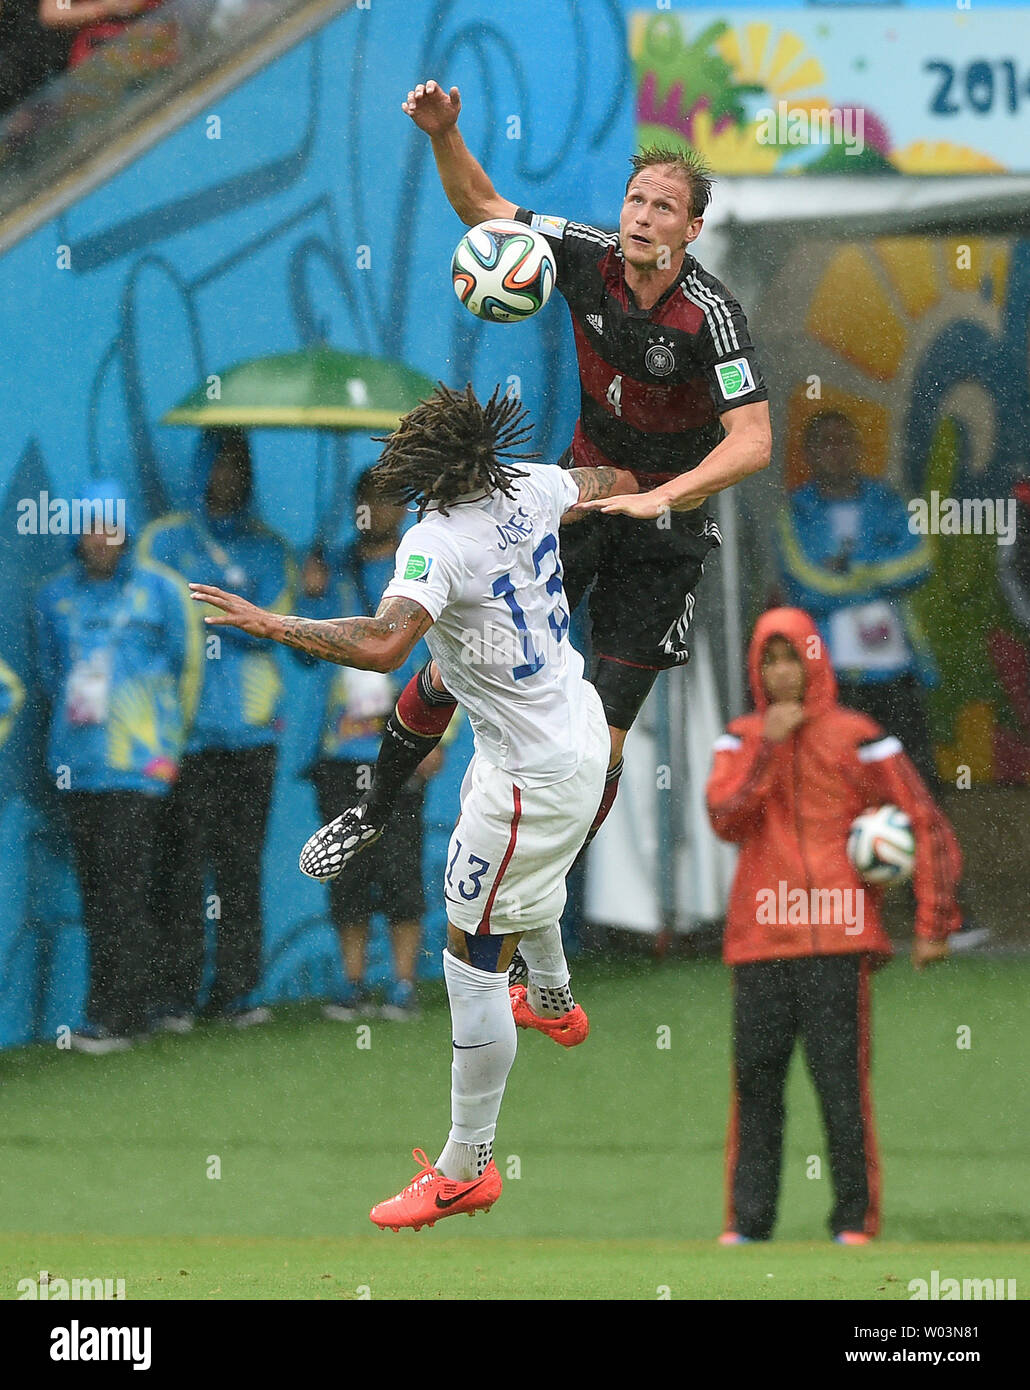 Jermaine Jones (L) of USA competes with Benedikt Howedes of Germany during the 2014 FIFA World Cup Group G match at the Arena Pernambuco in Recife, Brazil on June 26, 2014. UPI/Chris Brunskill Stock Photo